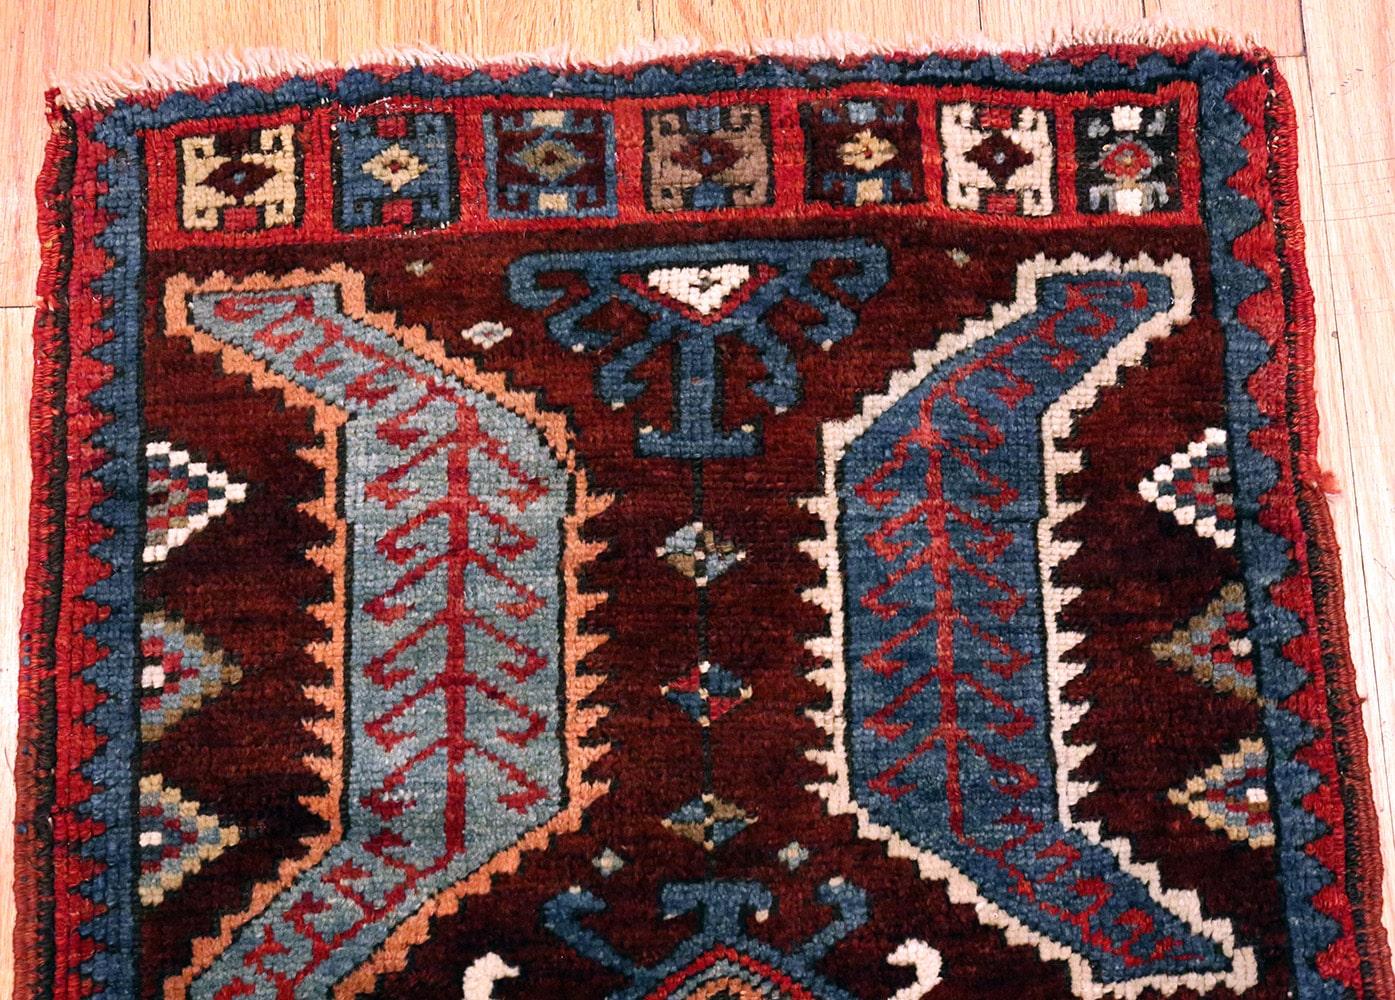 Small Antique Turkish Yastic Rug. Size: 2 ft 1 in x 3 ft 3 in (0.63 m x 0.99 m) 3